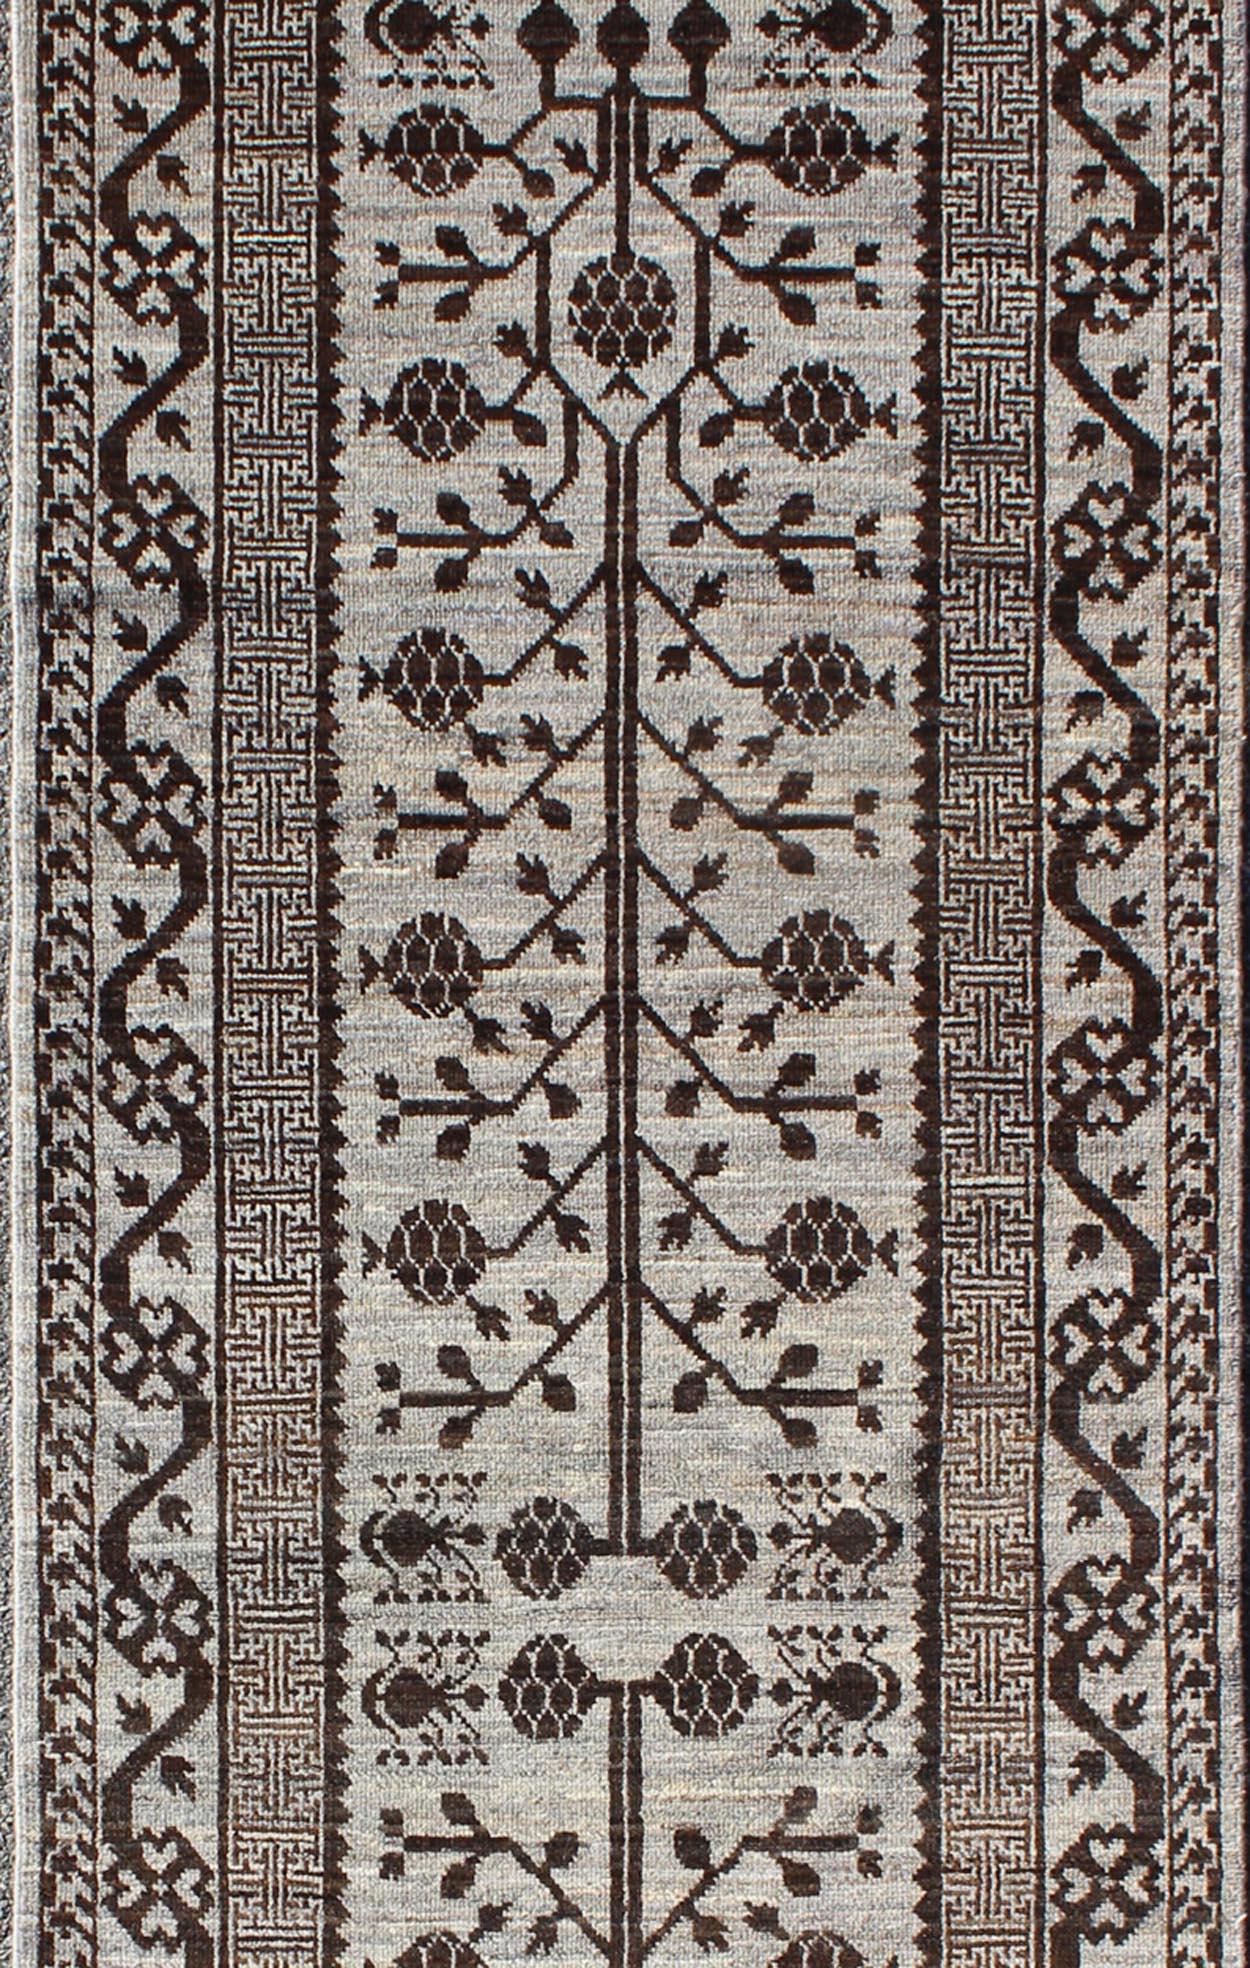 This Khotan features a geometric all-over design flanked by a repeating pattern in the border. The entirety of the piece is rendered in grey and brown which makes it a versatile rug, well-suited for a variety of interiors.

Measures: 3'0 x 9'9